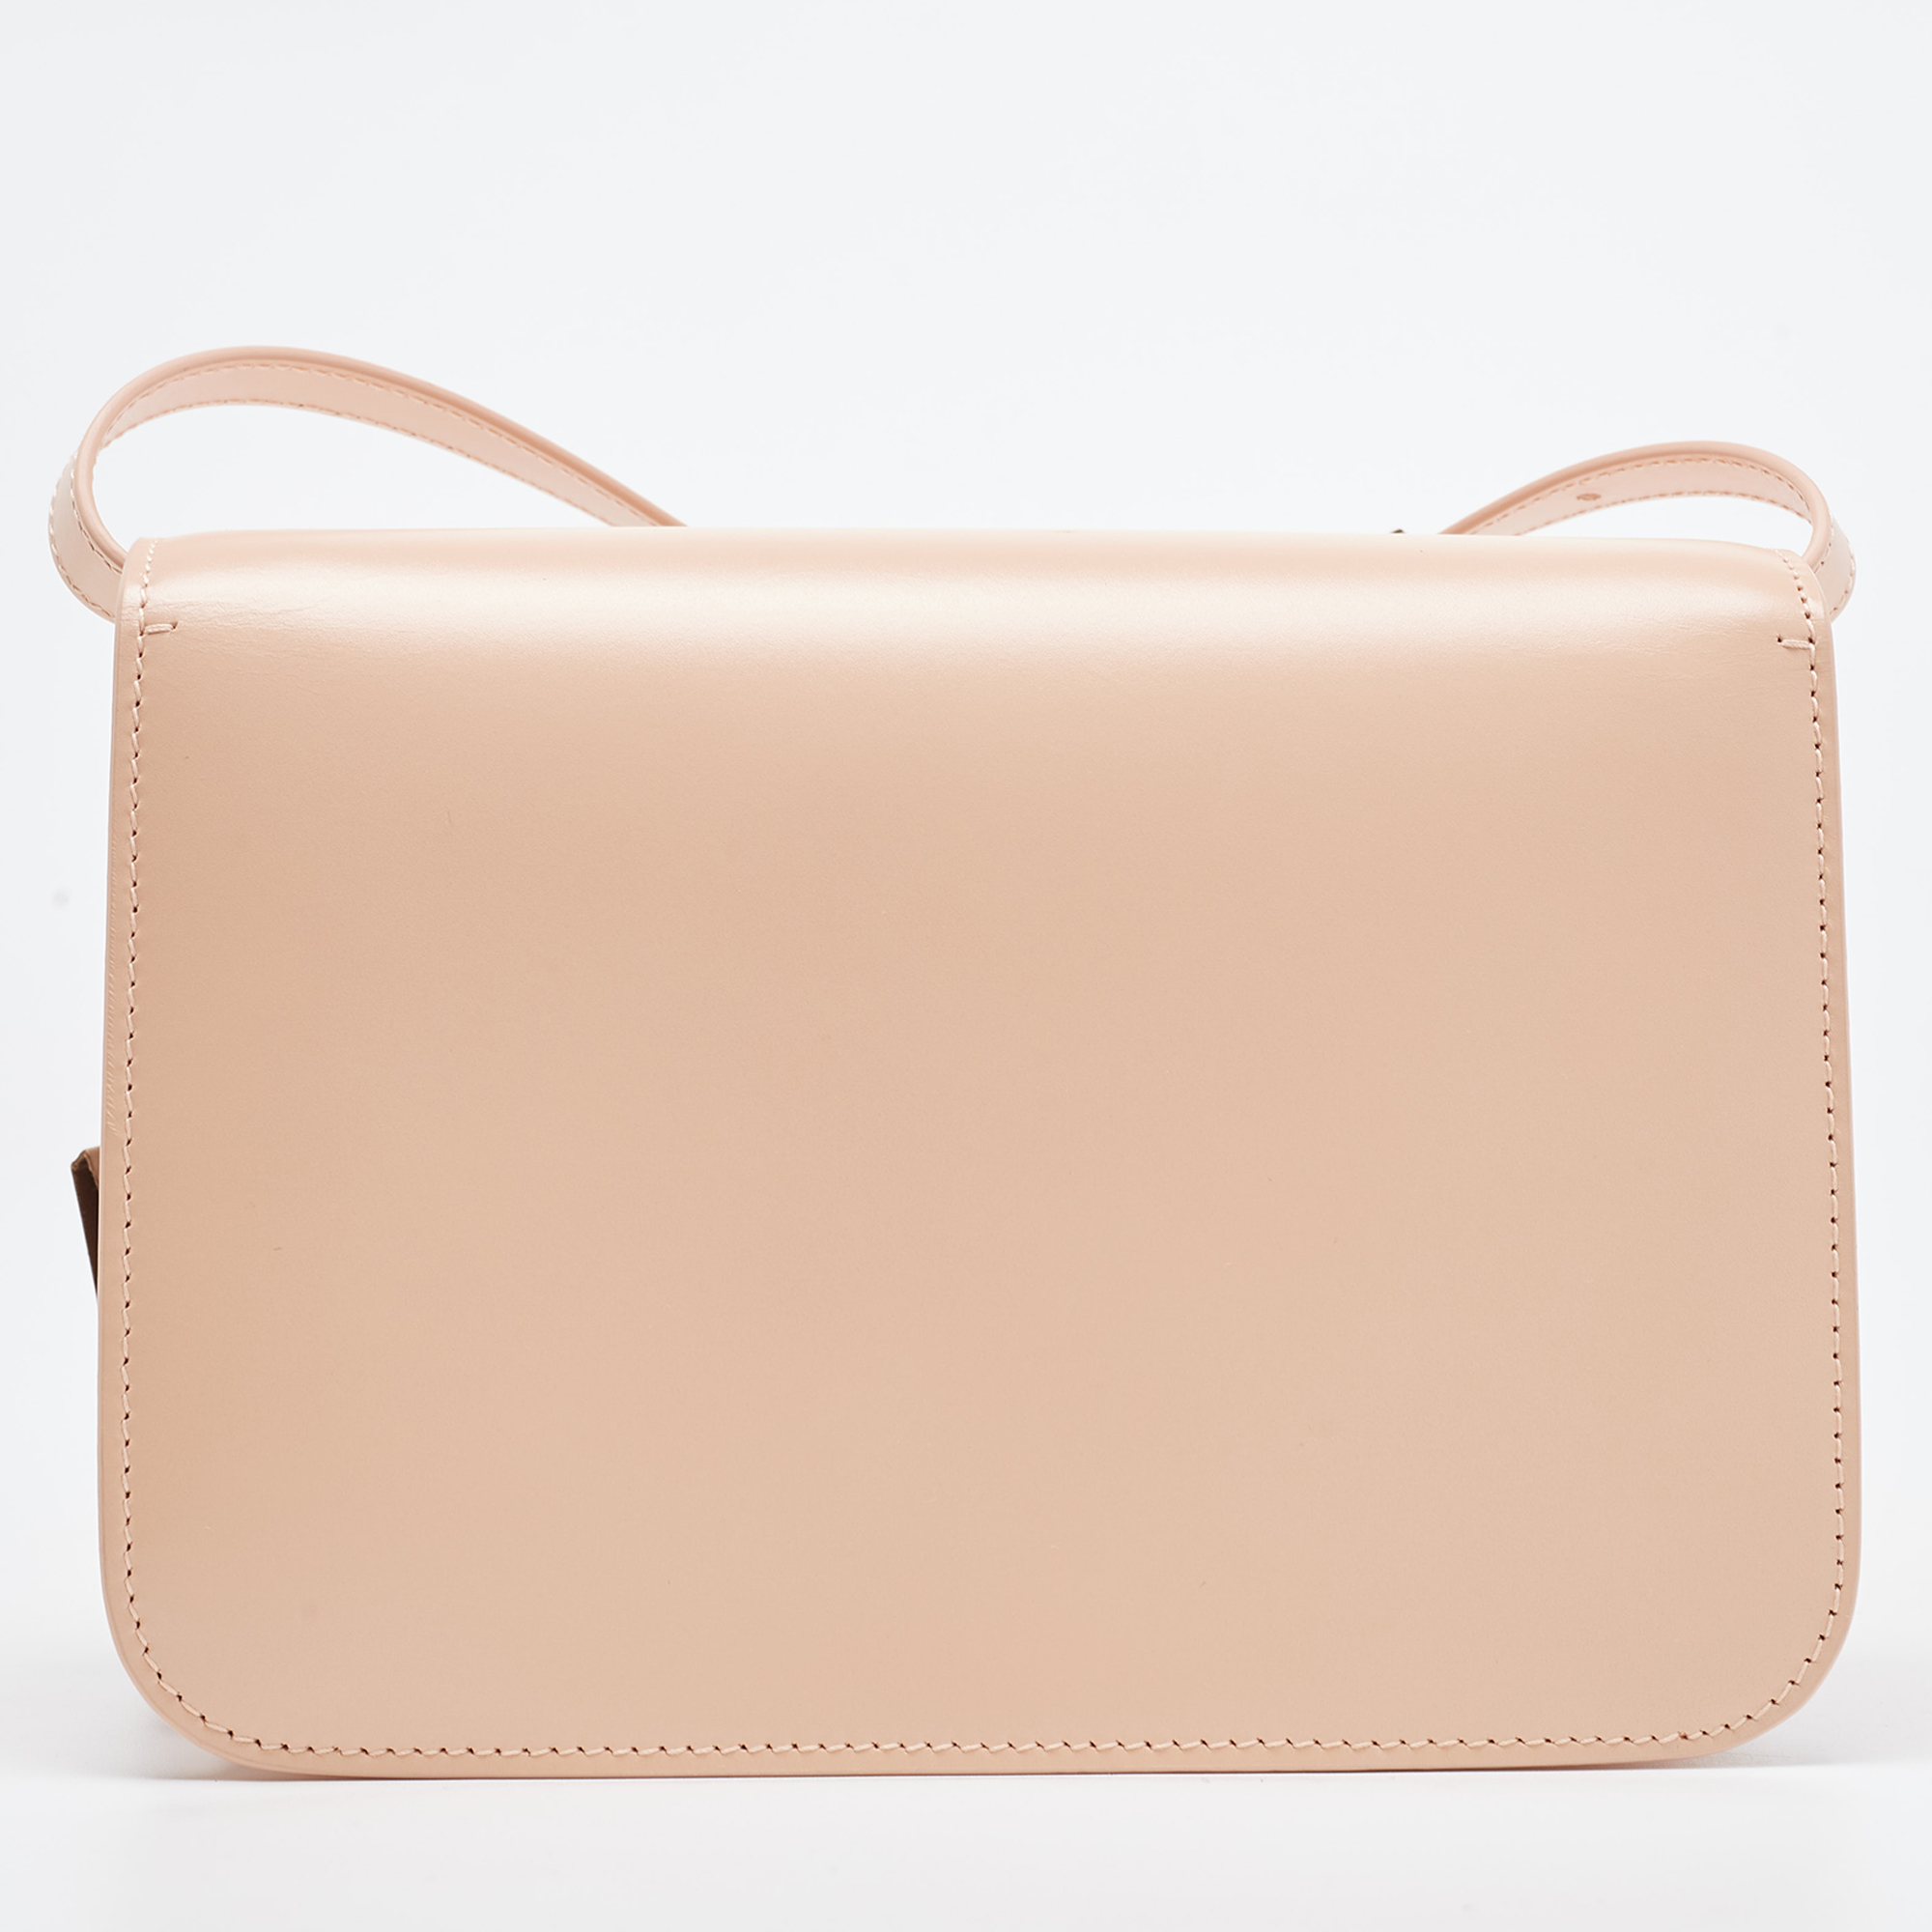 Burberry Peach PInk Leather Small TB Shoulder Bag